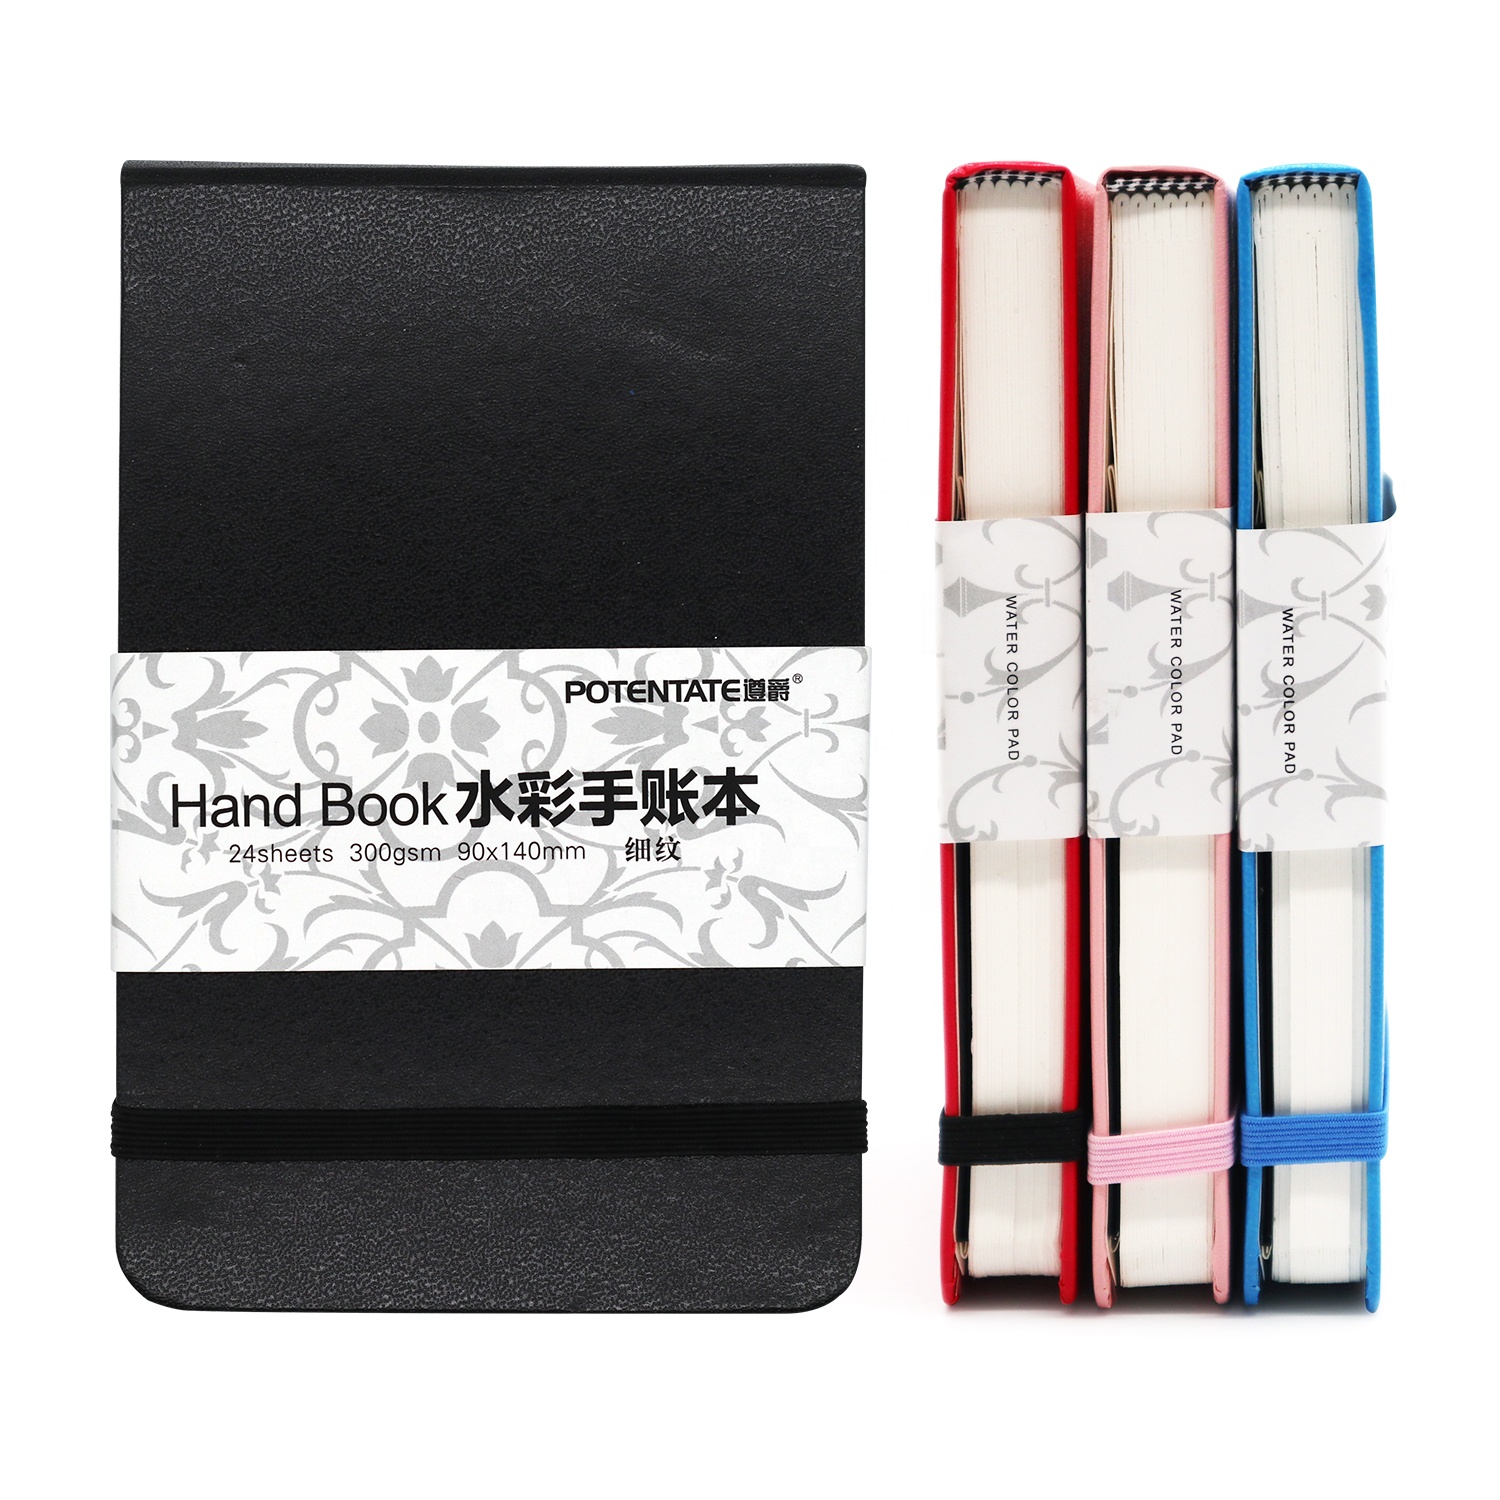 300GSM Journal Mini Drawing Book Sketchbook Cotton Watercolor Paper Notebook/24 Sheets/4 Color Papel Para Acuarela Art Supplies1